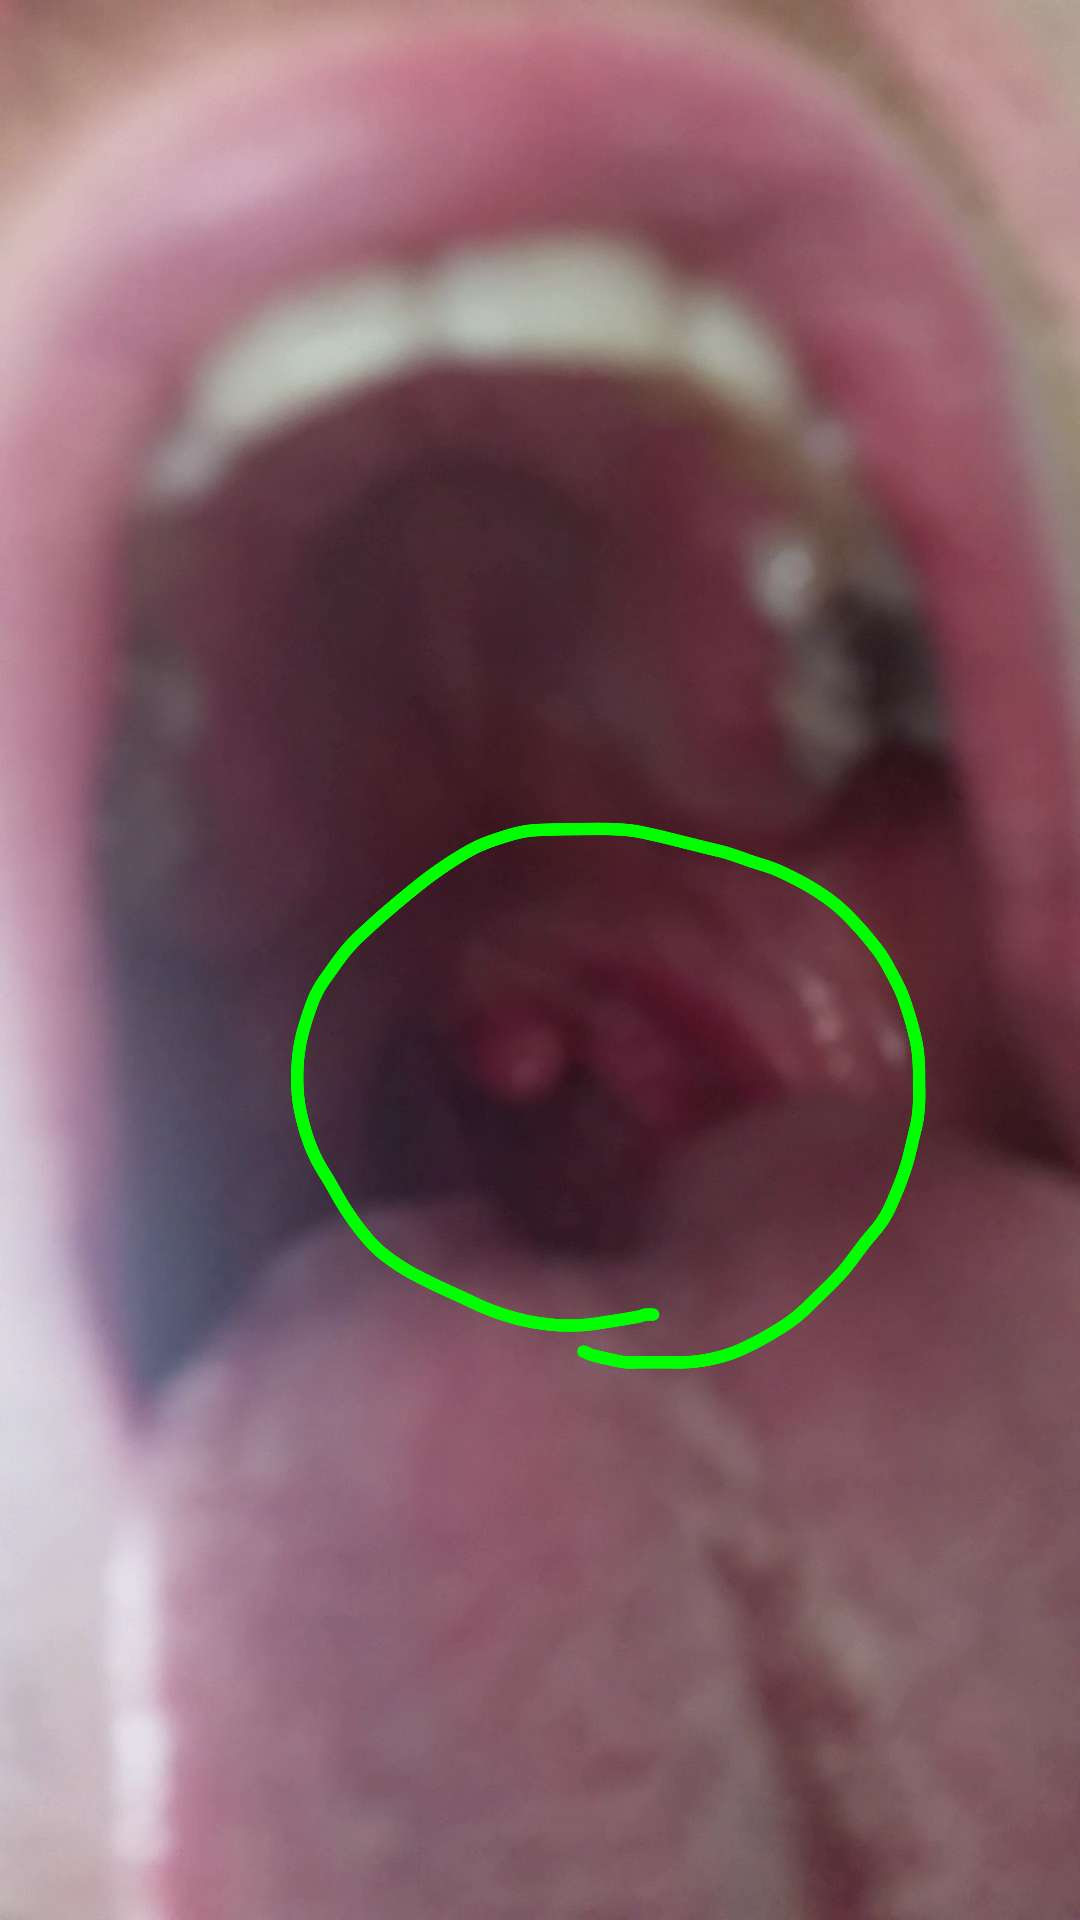 White Things On Tonsils Pict Art